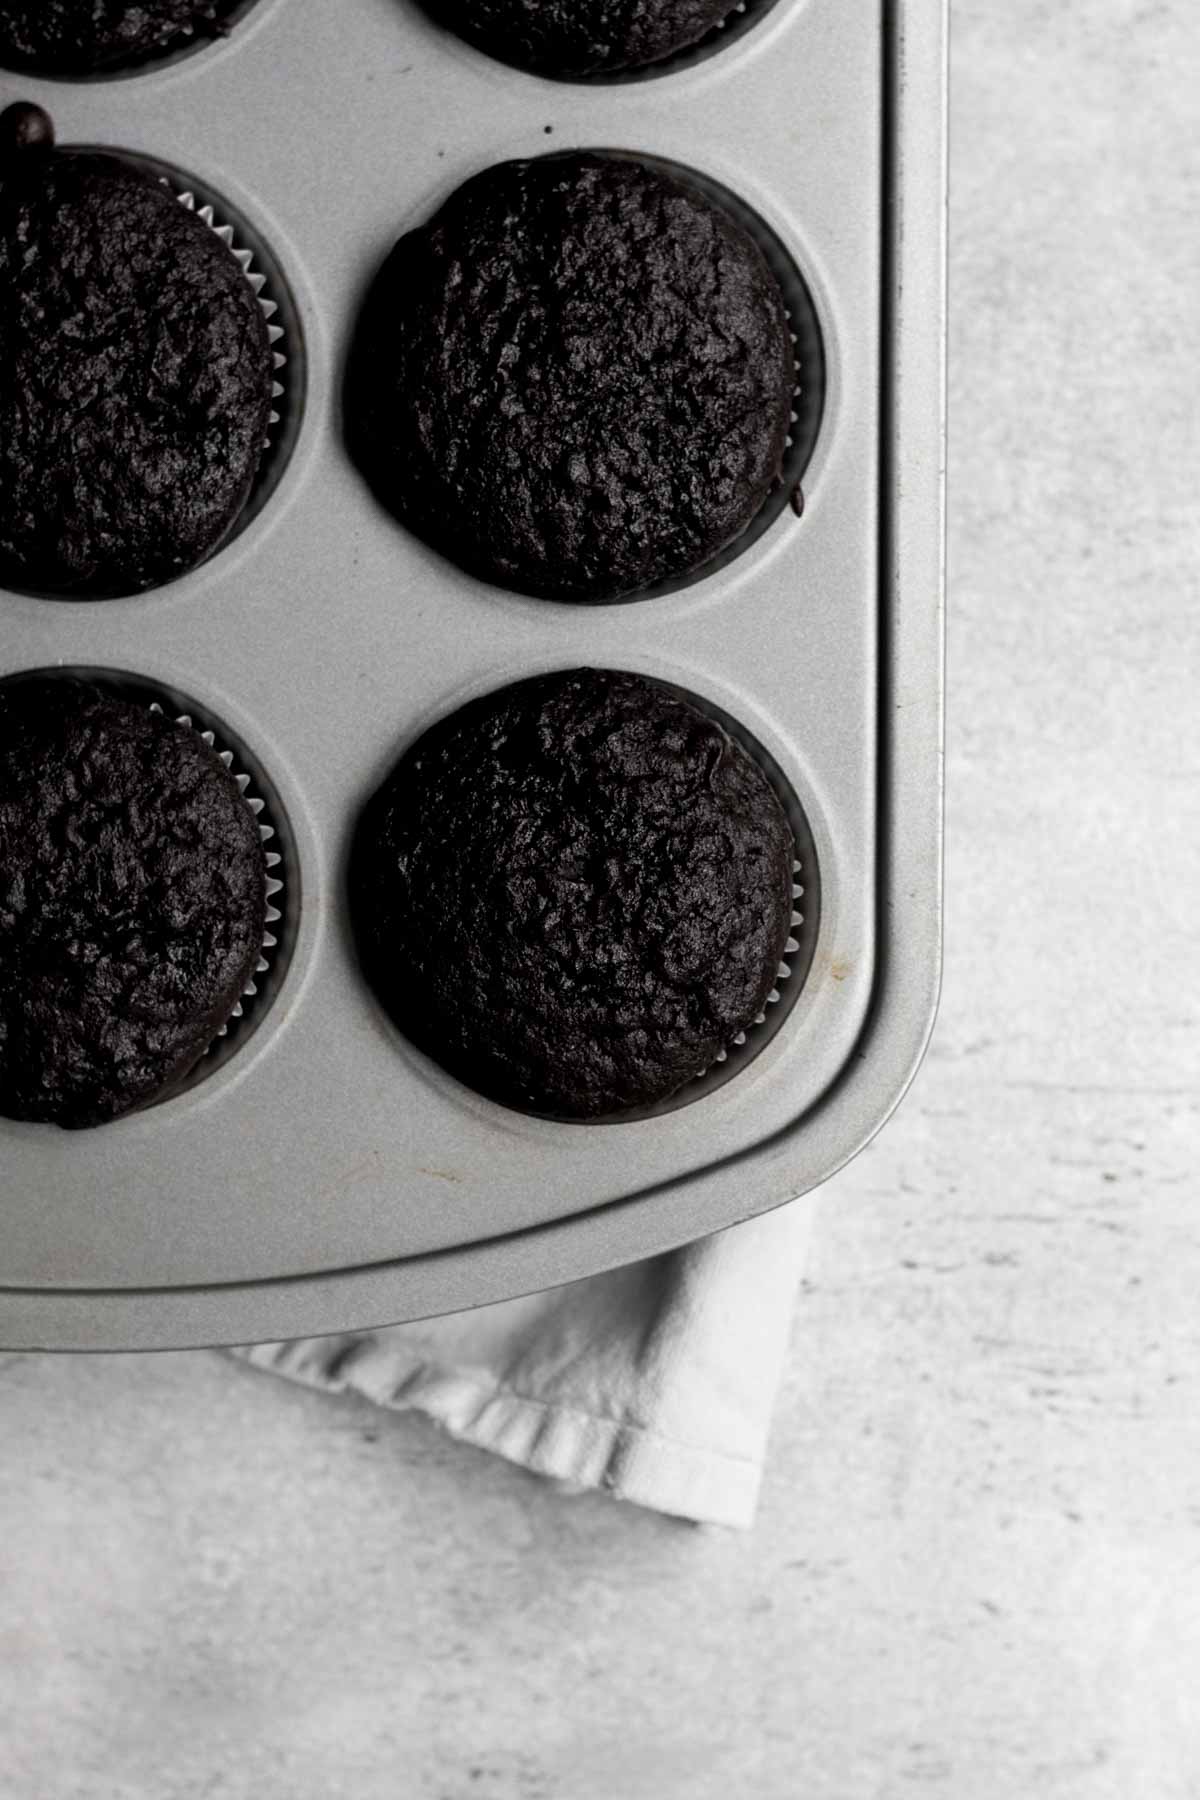 Baked chocolate cupcakes in the tin.